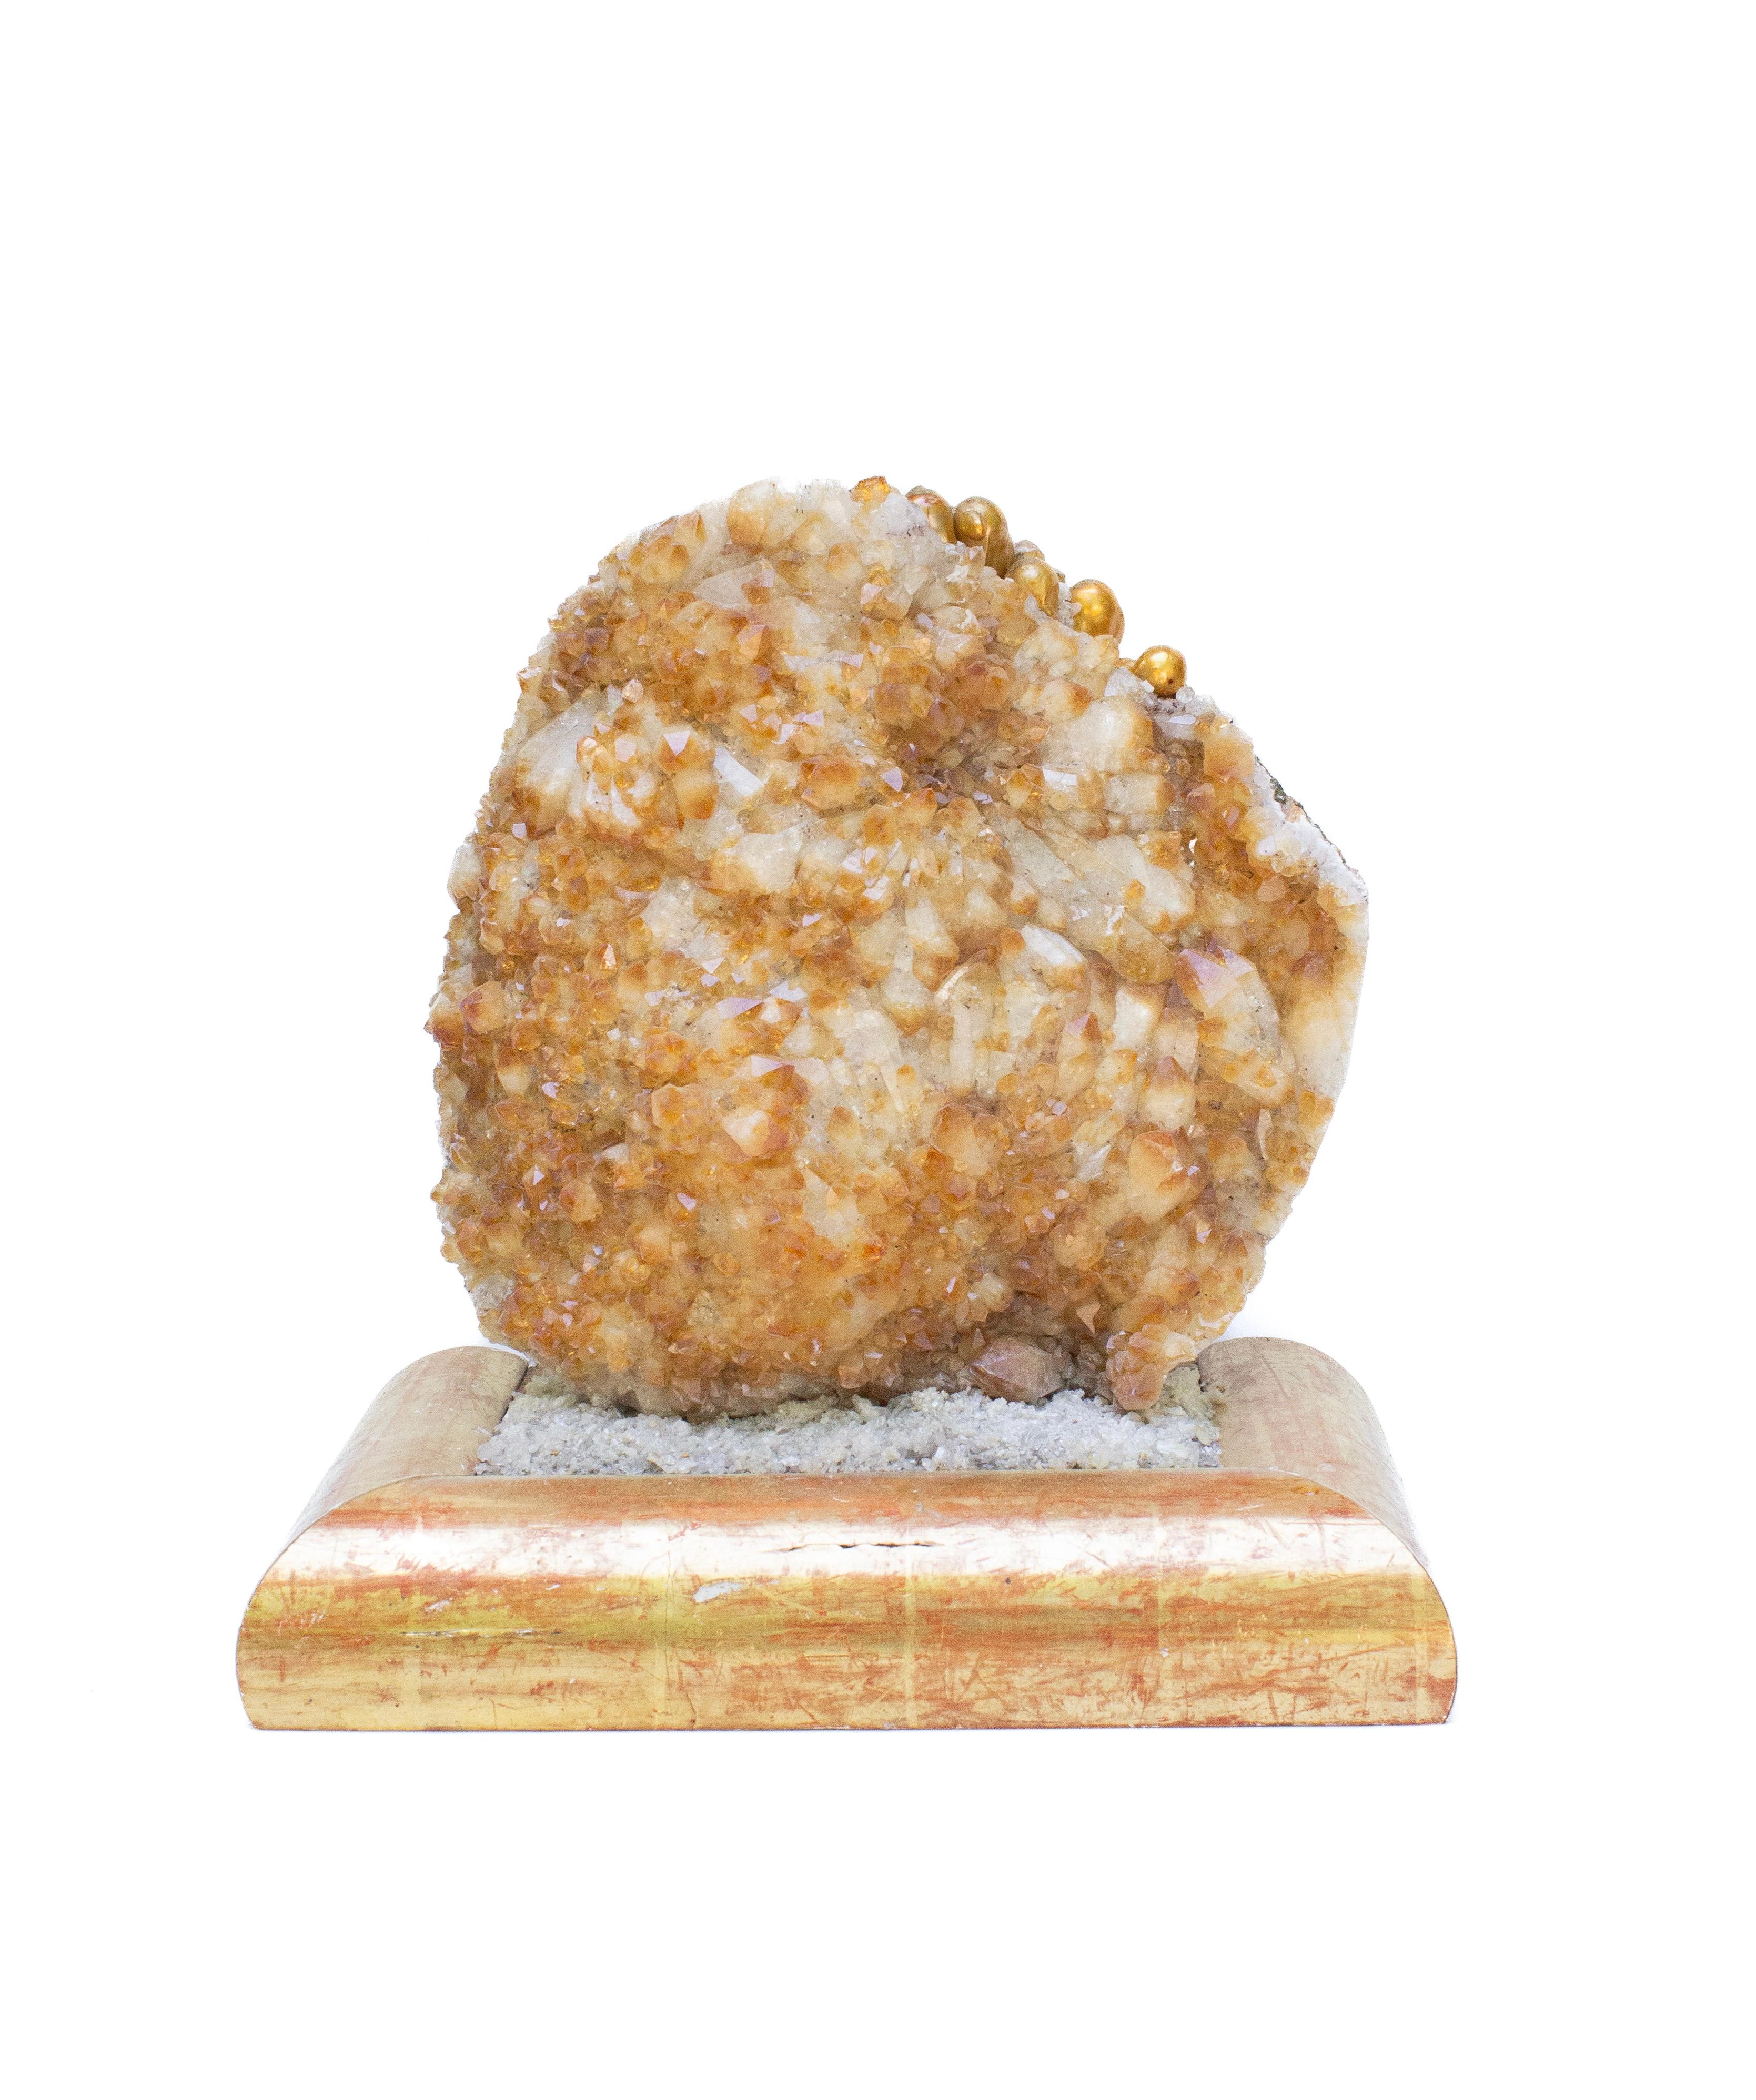 Citrine crystals in matrix mounted on a gilded 18th century Italian base. The citrine crystal specimen is adorned with baroque pearls and it sits in a bed of crushed crystals and coordinates with the original 18th century Italian giltwood base.